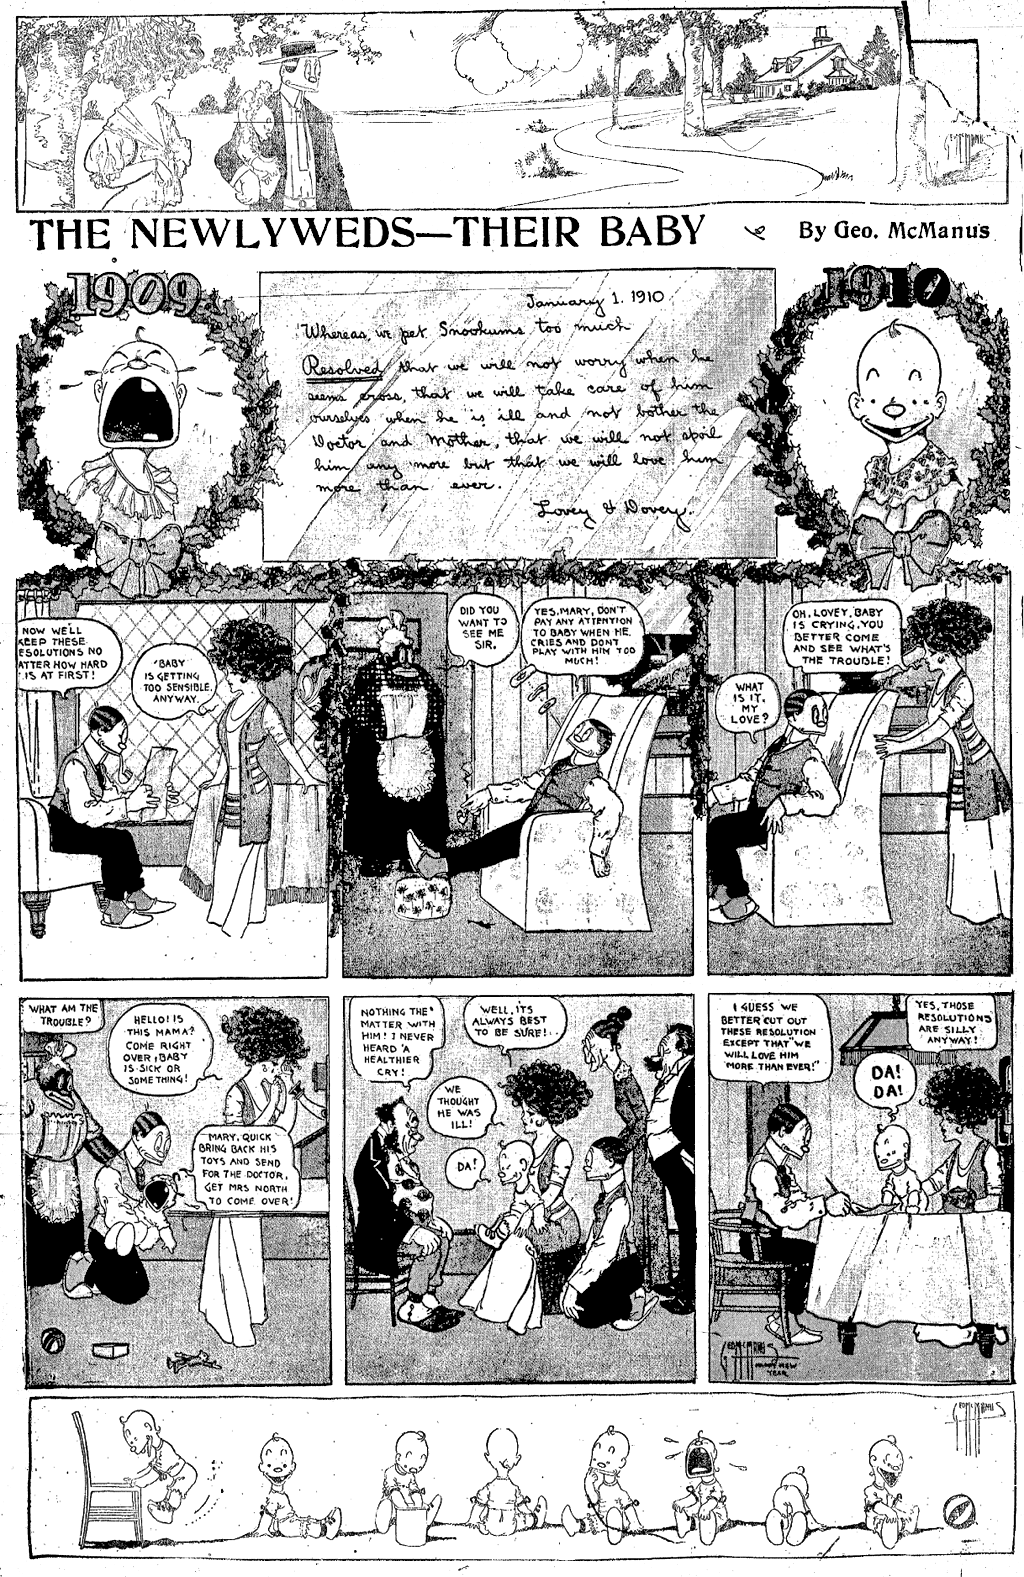 "The Newlyweds" by George McManus, published January 1, 1910. View full comic.